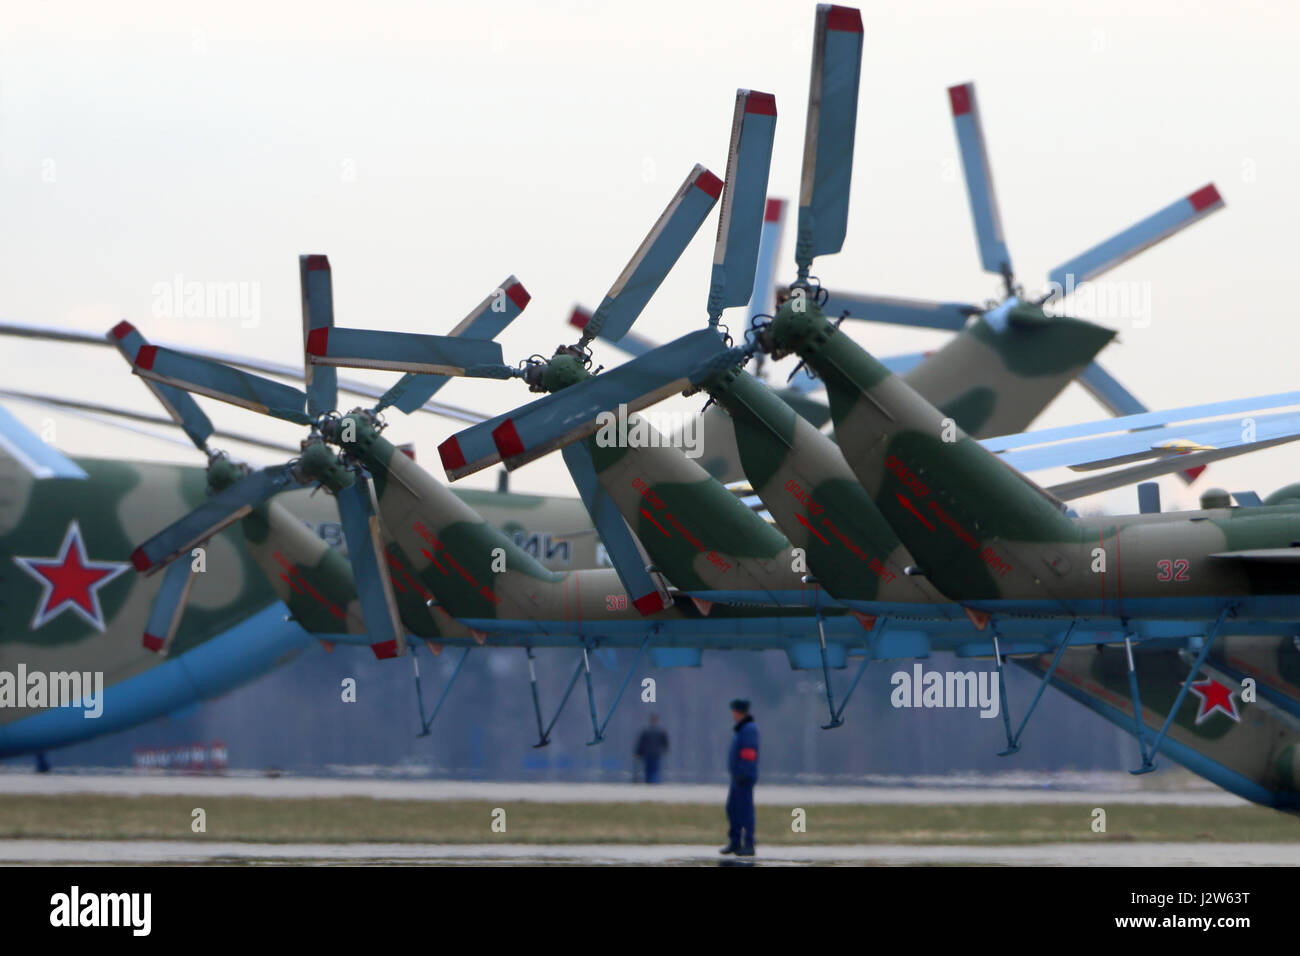 KUBINKA, MOSCOW REGION, RUSSIA - APRIL 24, 2017: Tail rotors of Mil Mi-8AMTSH helicopters of Russian air force during Victory Day parade rehearsal at  Stock Photo